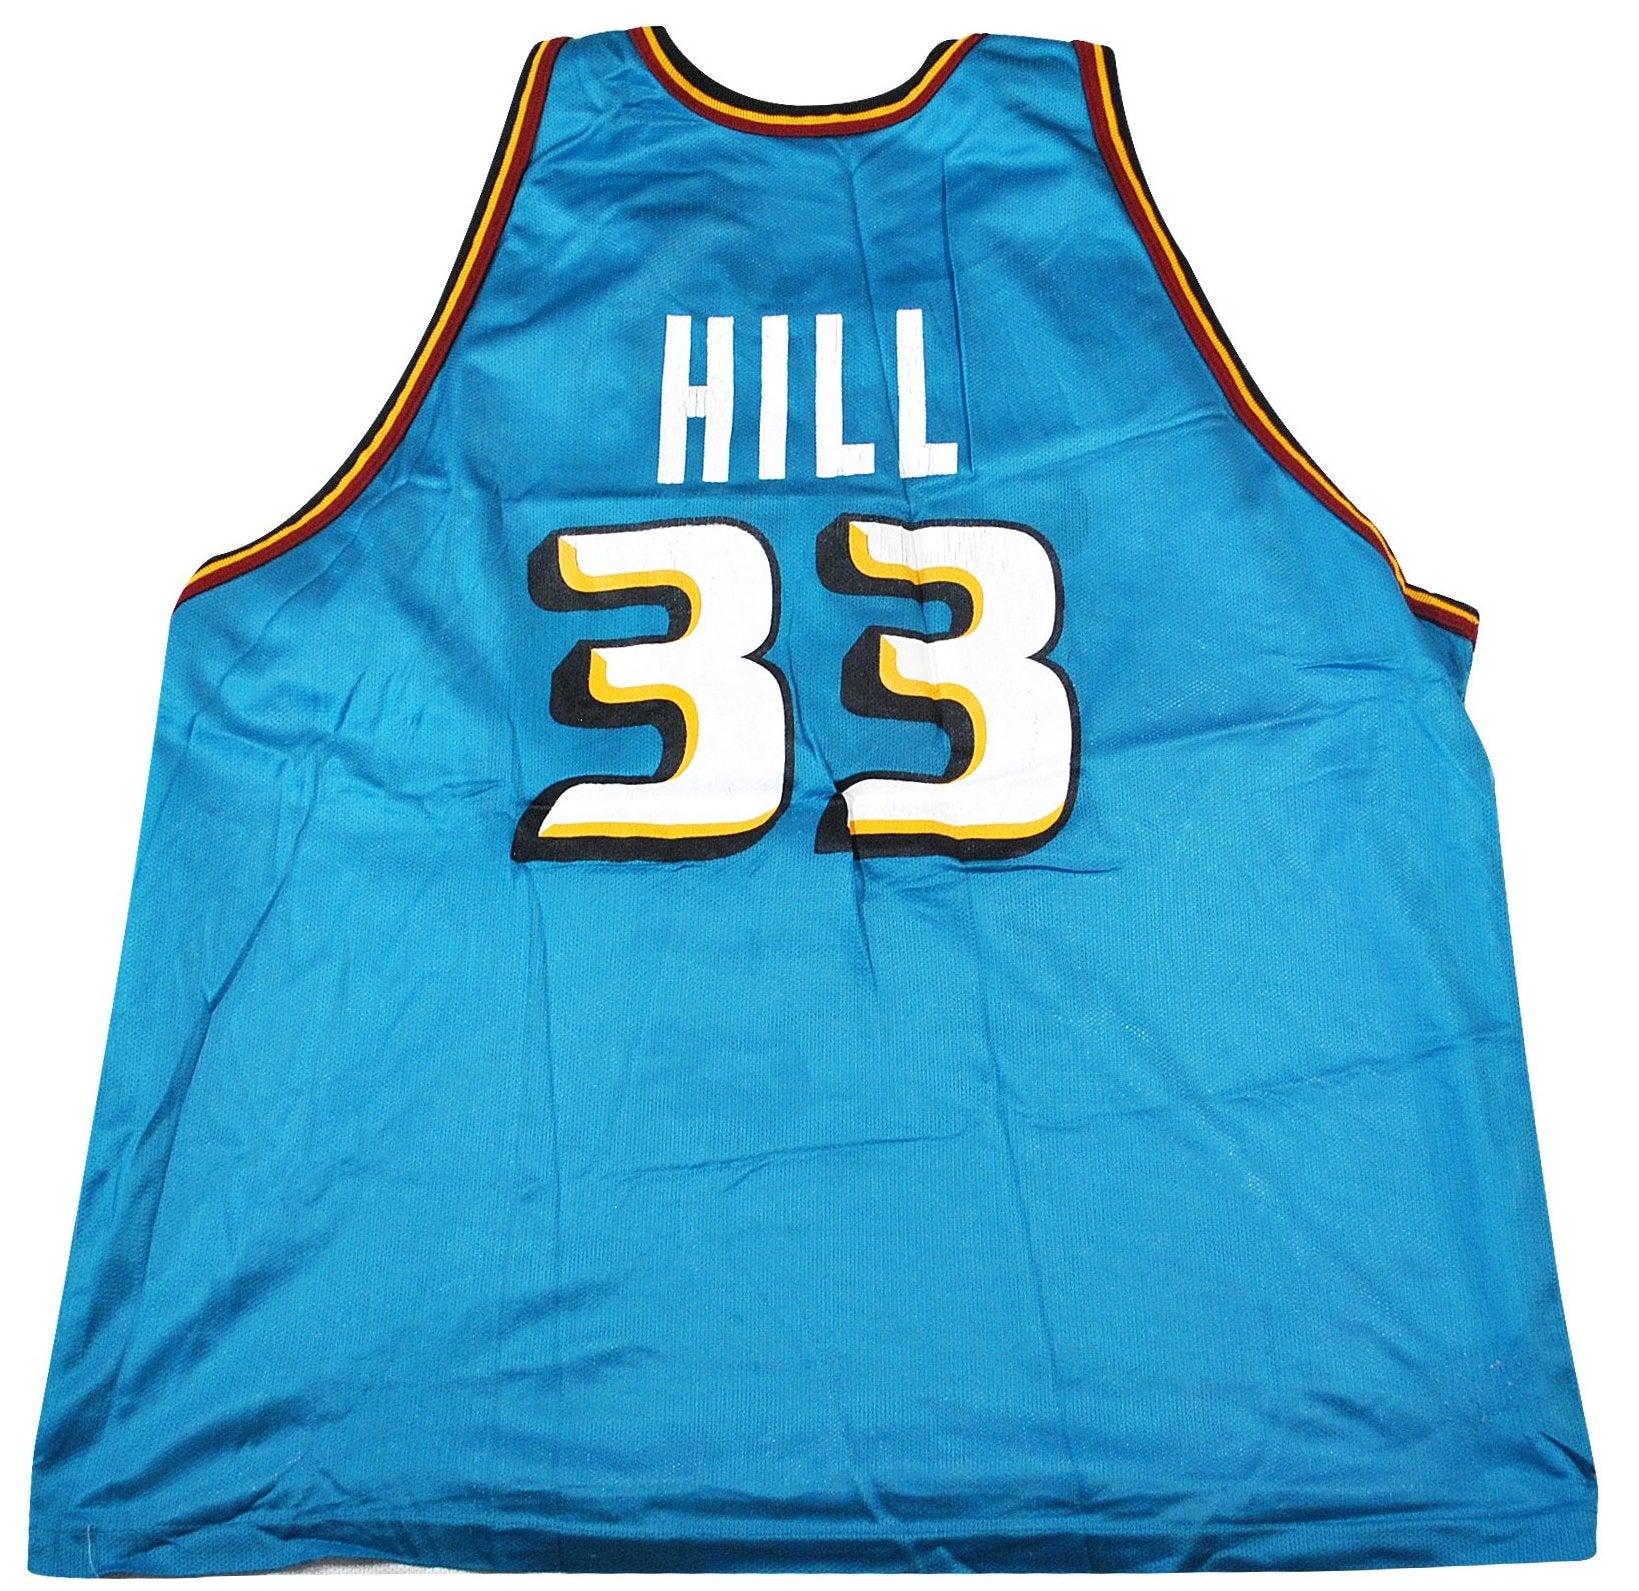 AGR Authentic Jersey of the Week(end): Grant Hill on the Detroit Pistons